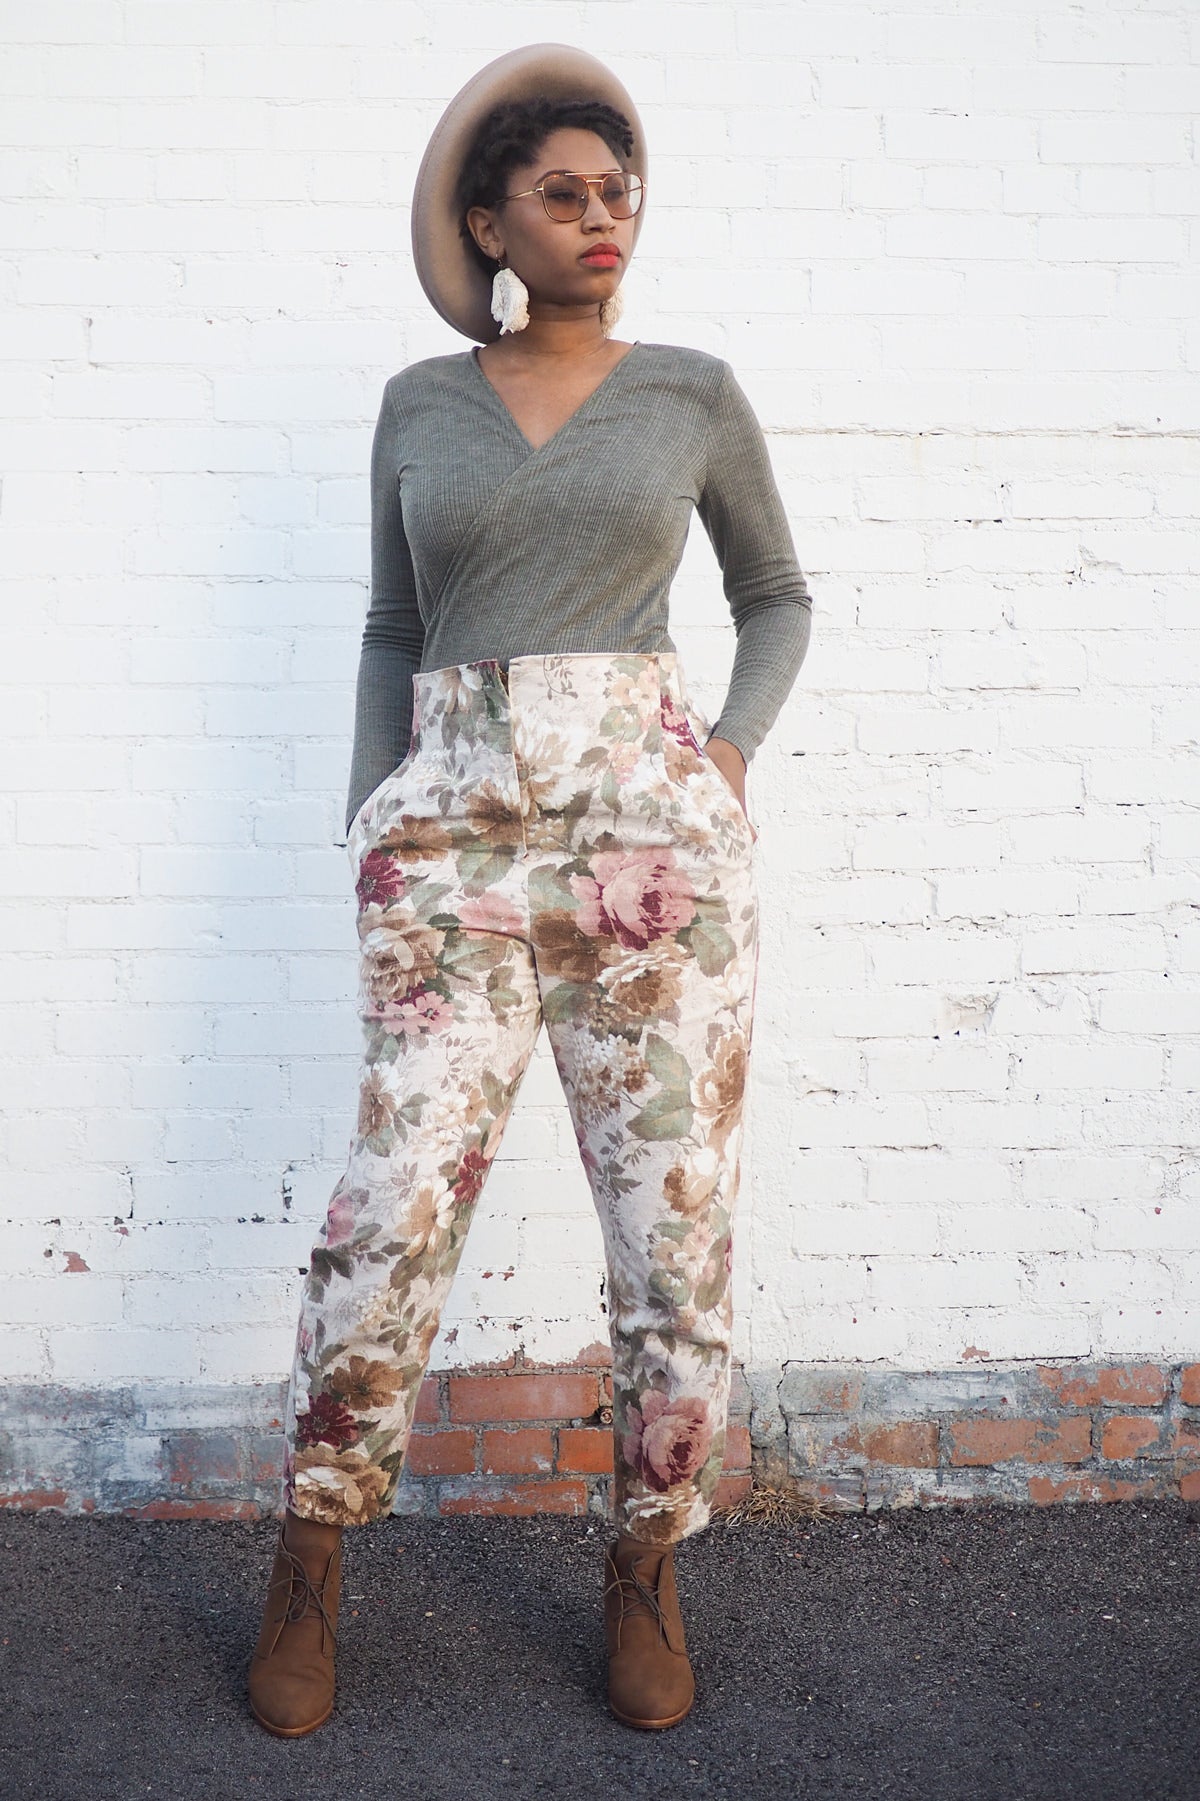 Alexis Bailey's Elio Top – Allie Olson Sewing Patterns